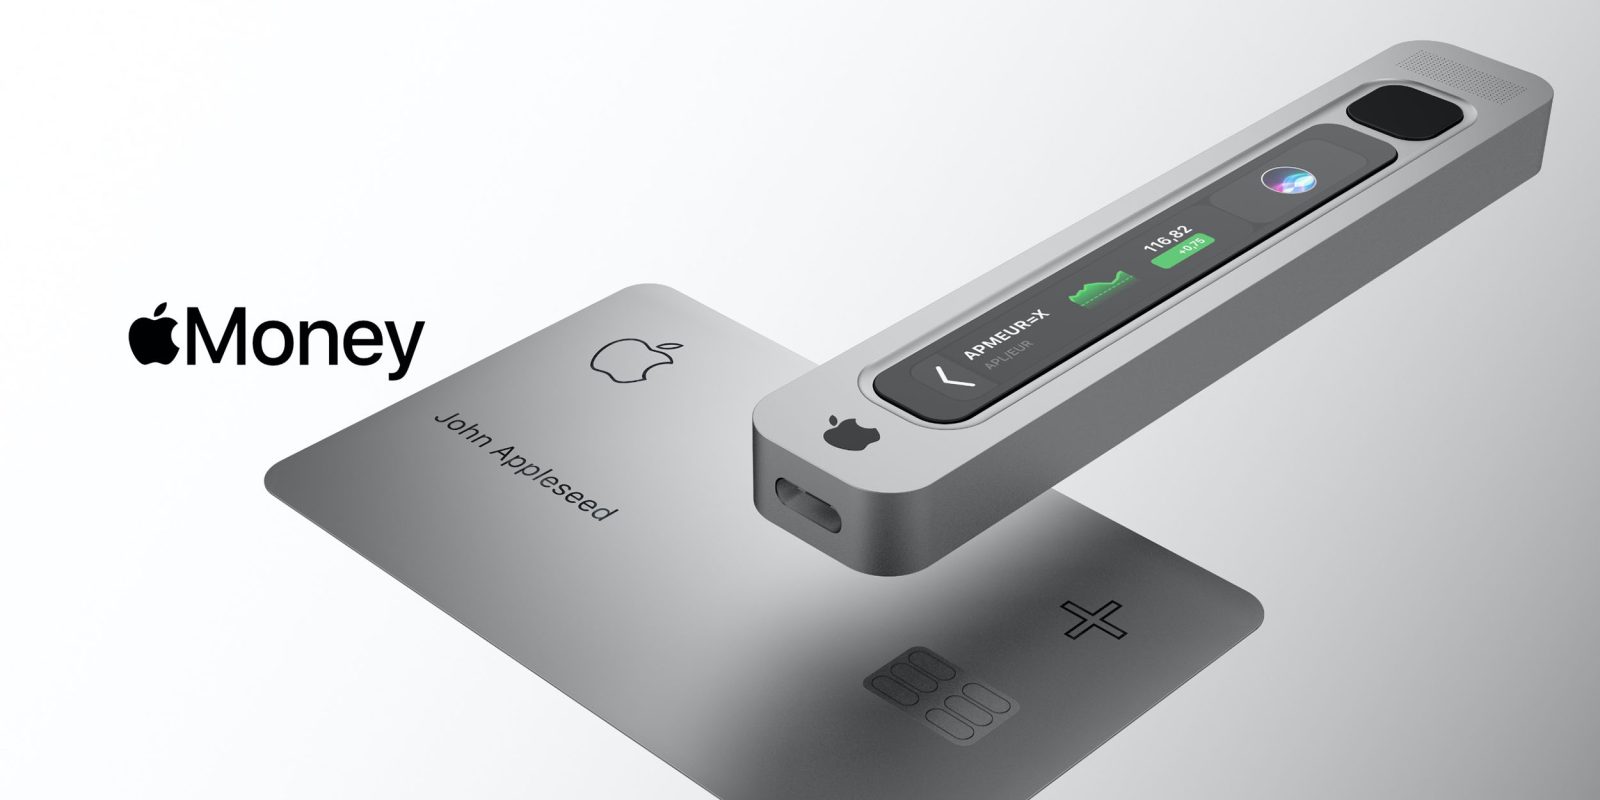 Apple hardware crypto wallet concept